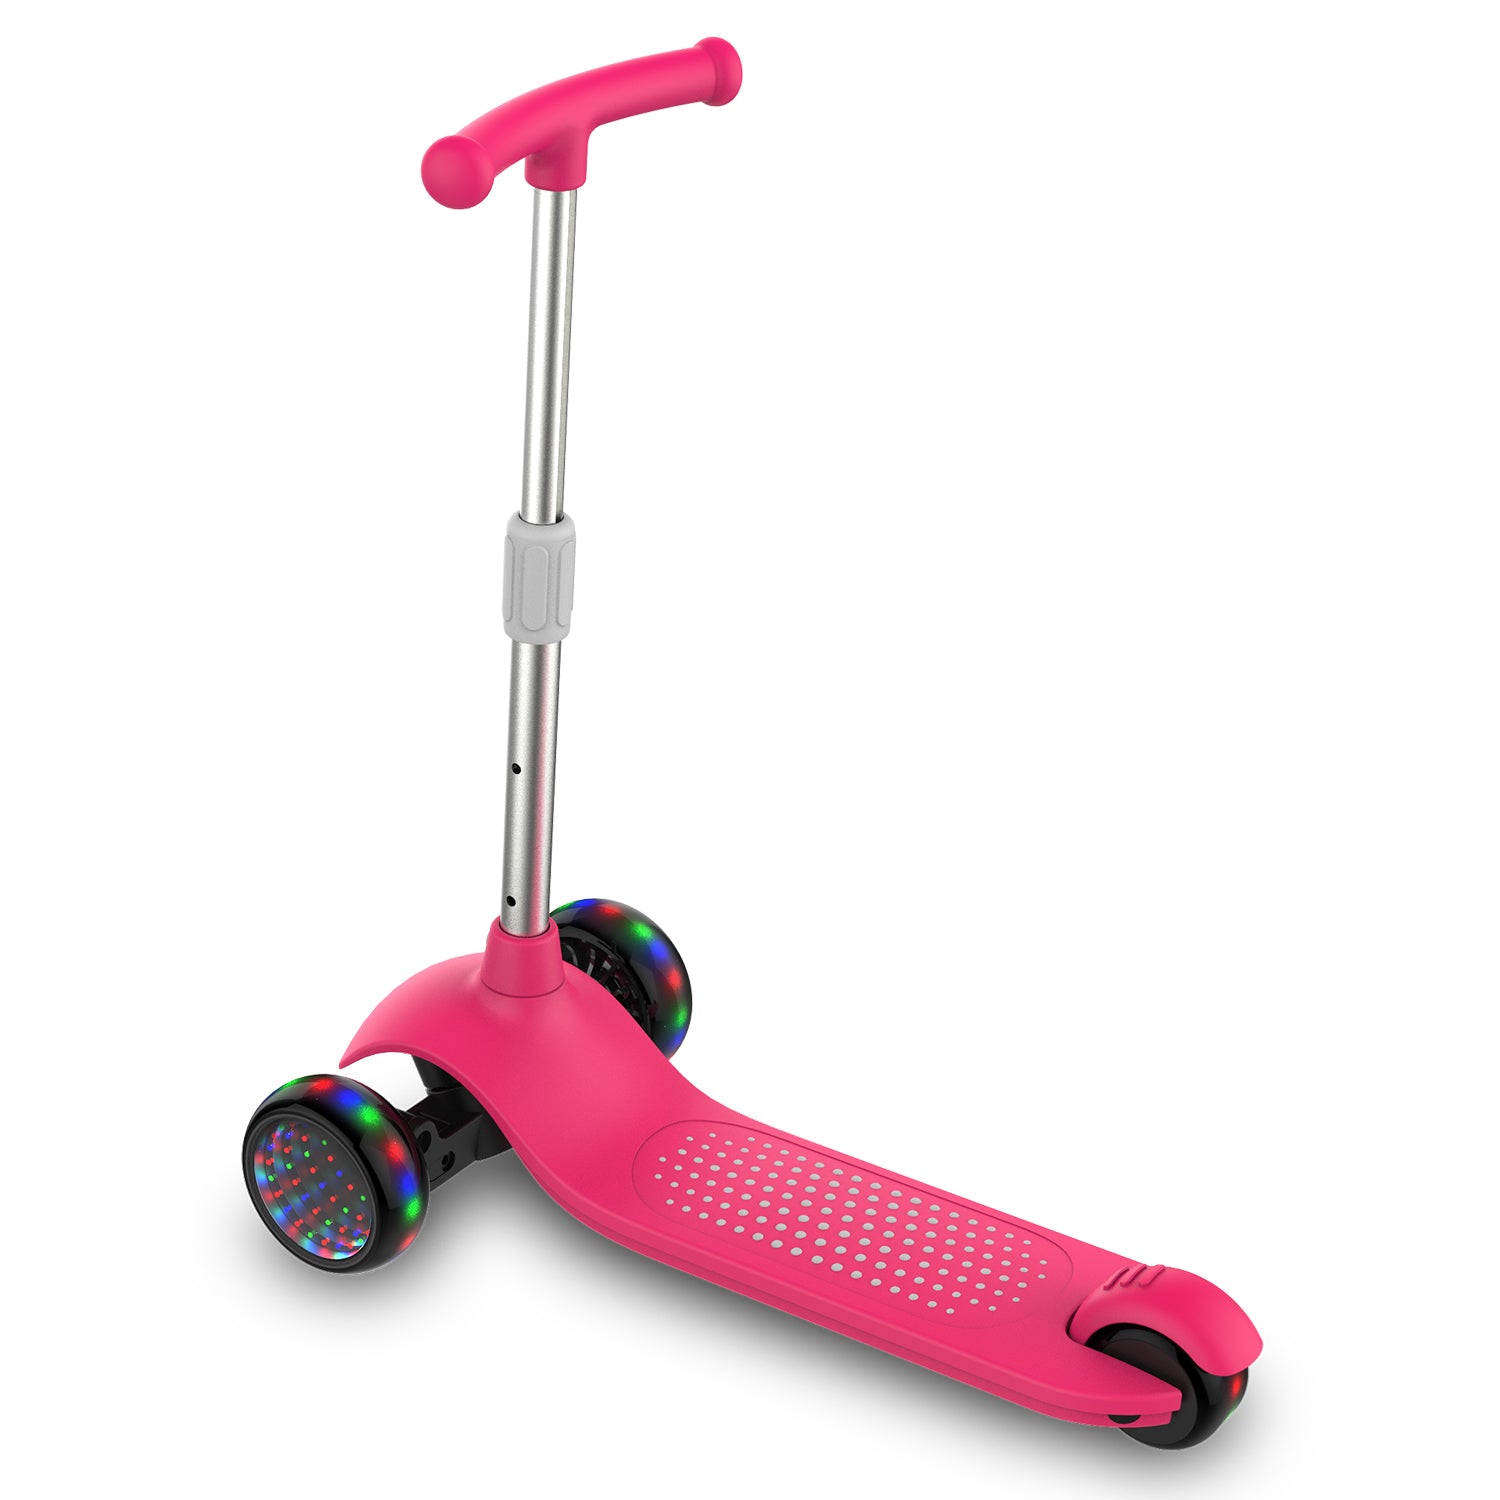 kids scooter online, kids tri scooter, girls pink scooter